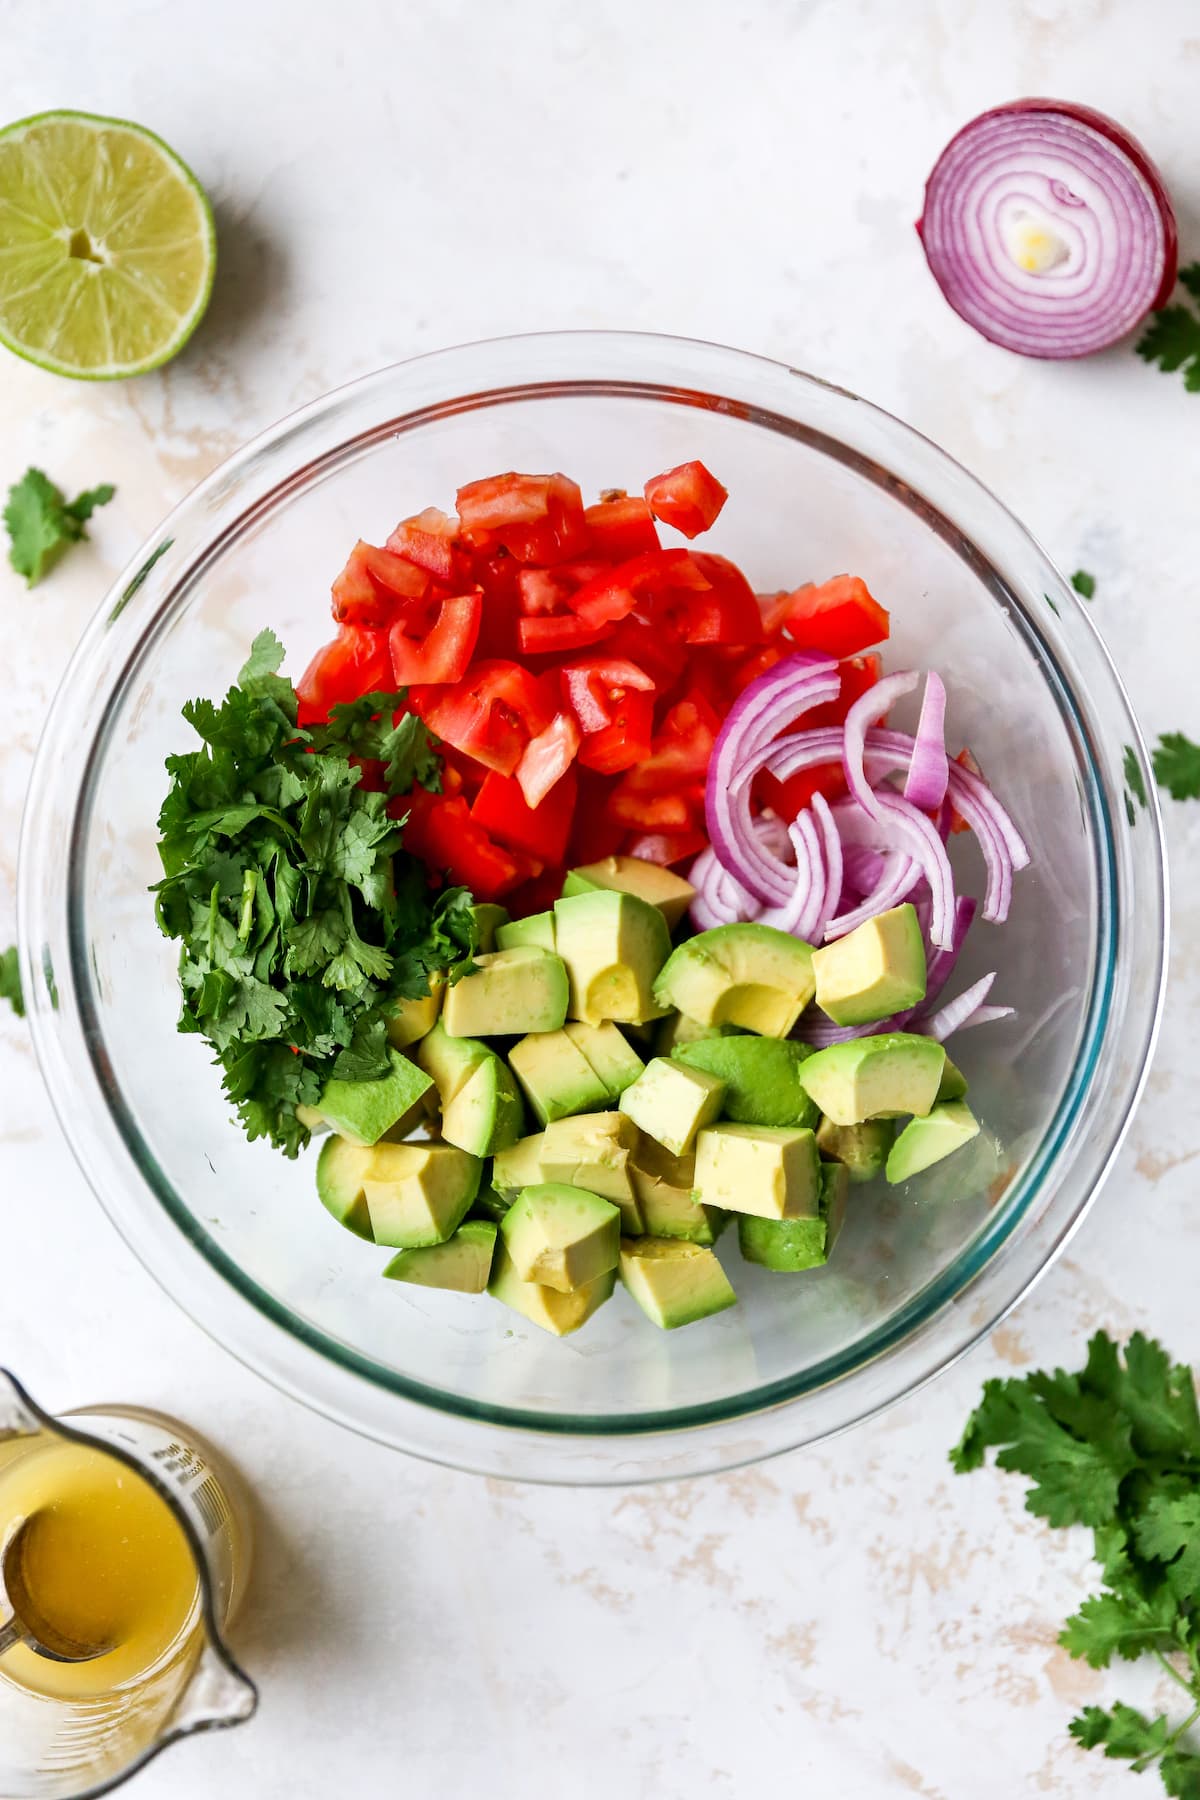 Glass mixing bowl with chopped tomato, red onion, avocado and cilantro.